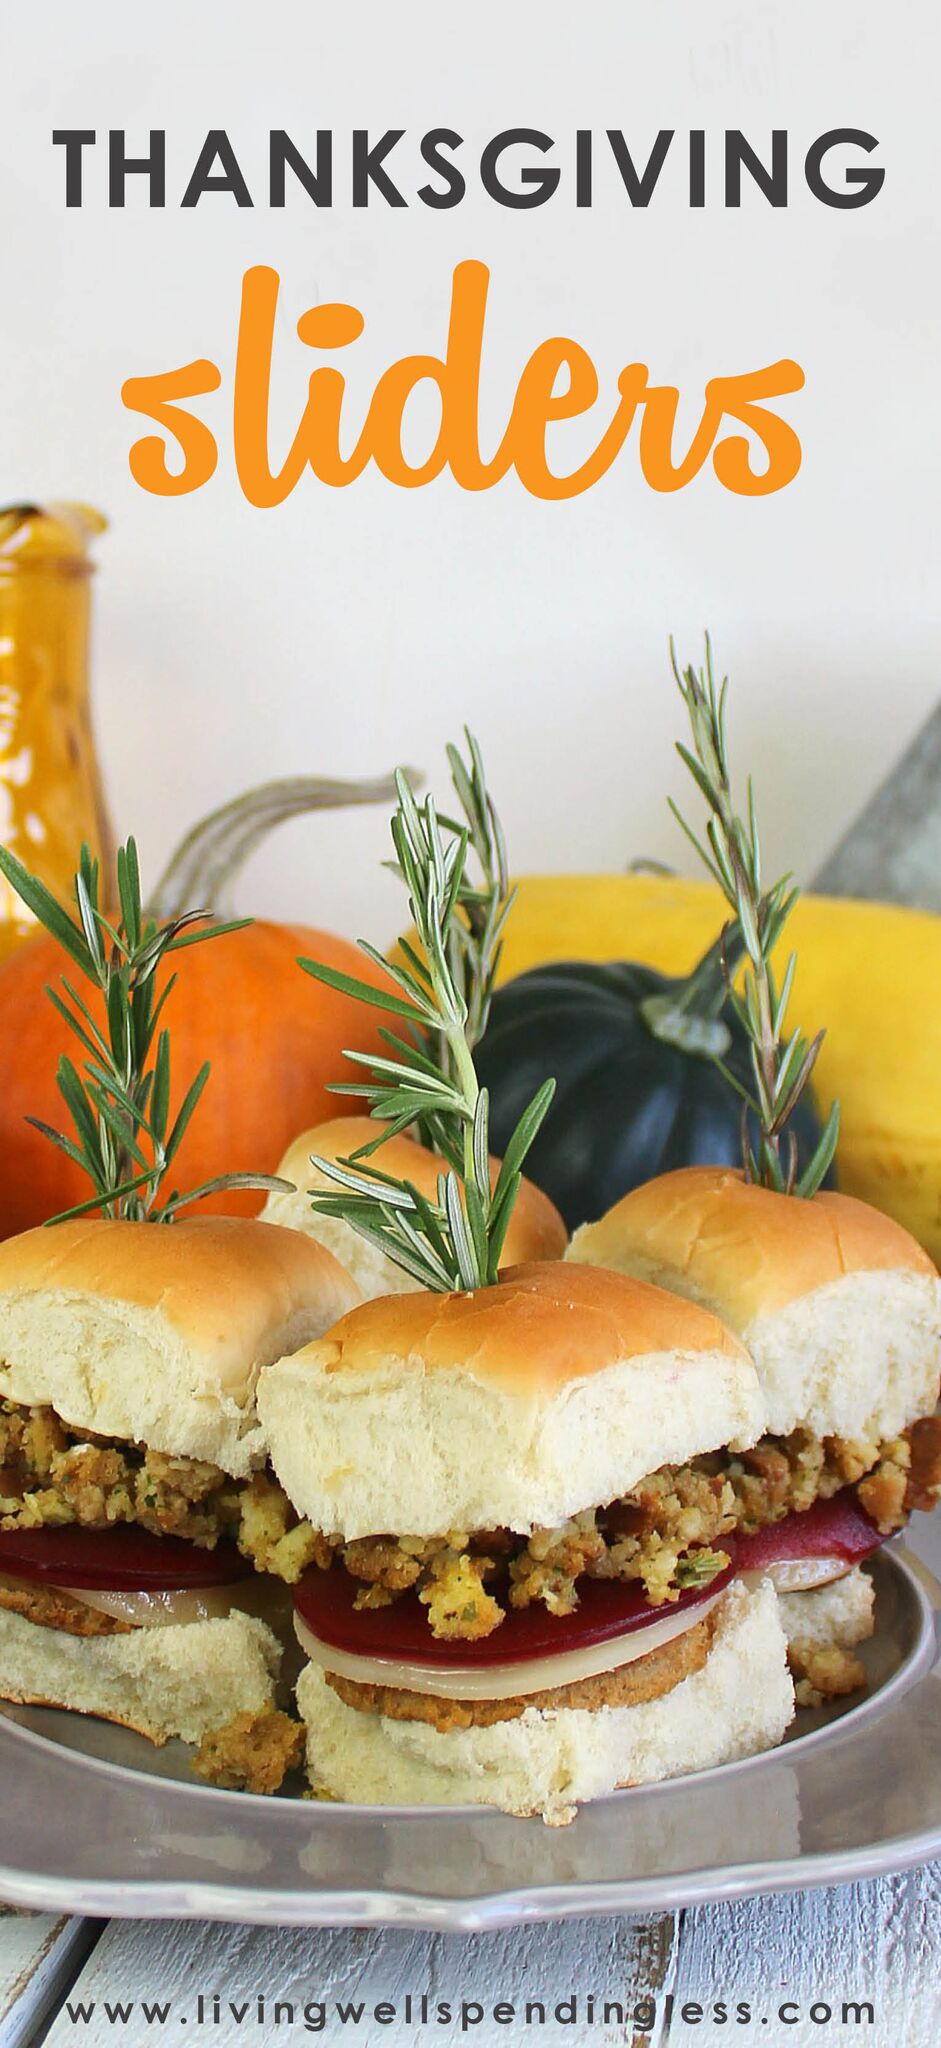 Thanksgiving Slider Recipe | Recipe for Holiday Leftovers